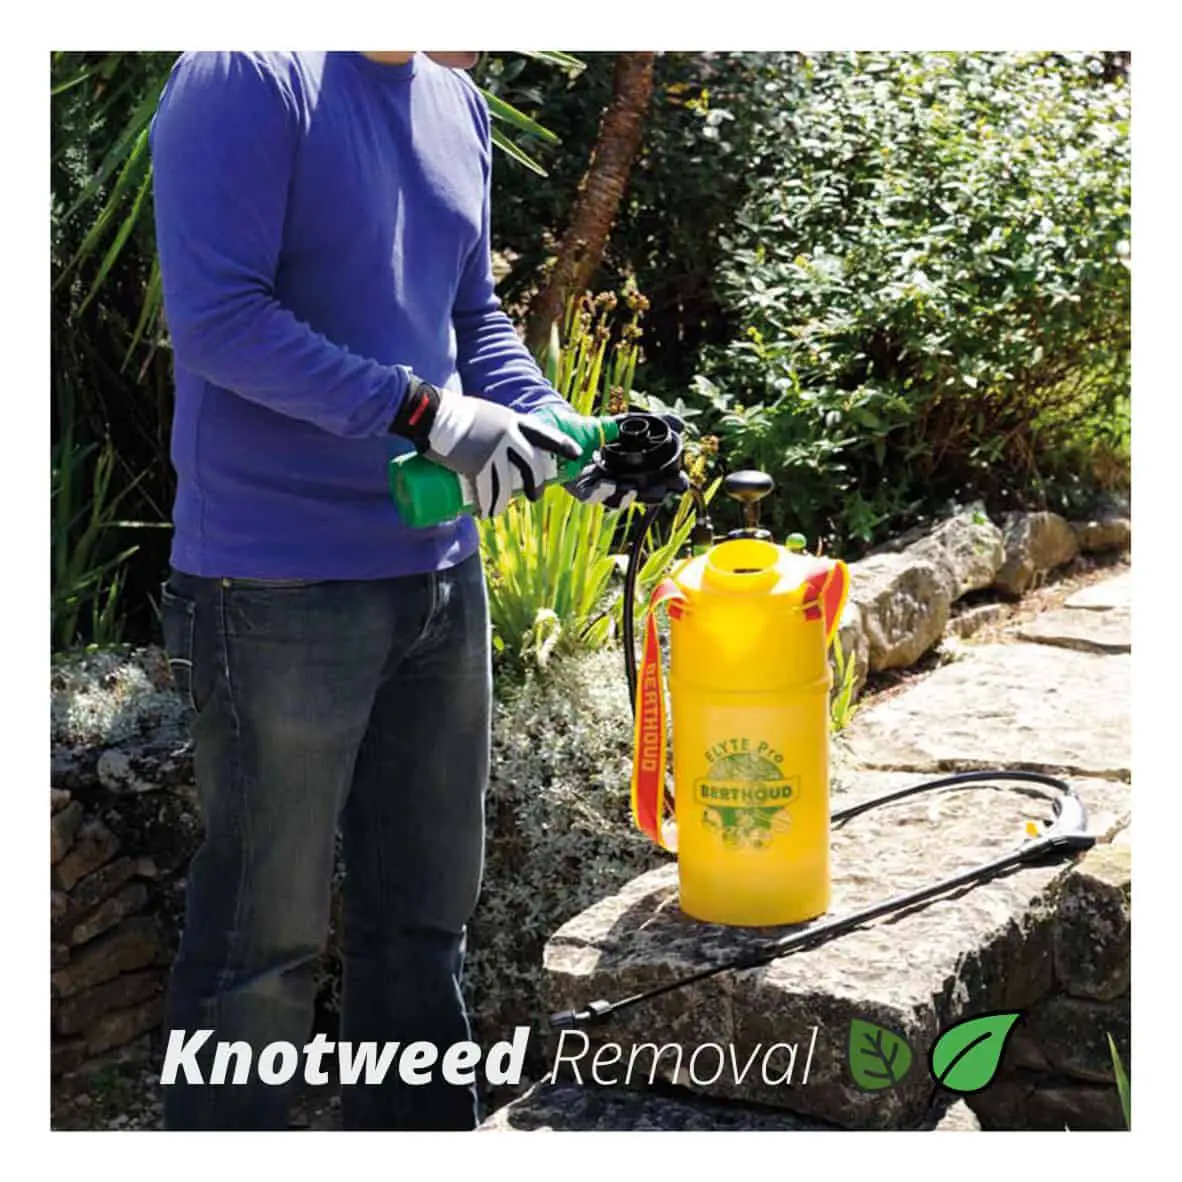 Spraying knotweed as part of a designated treatment plan